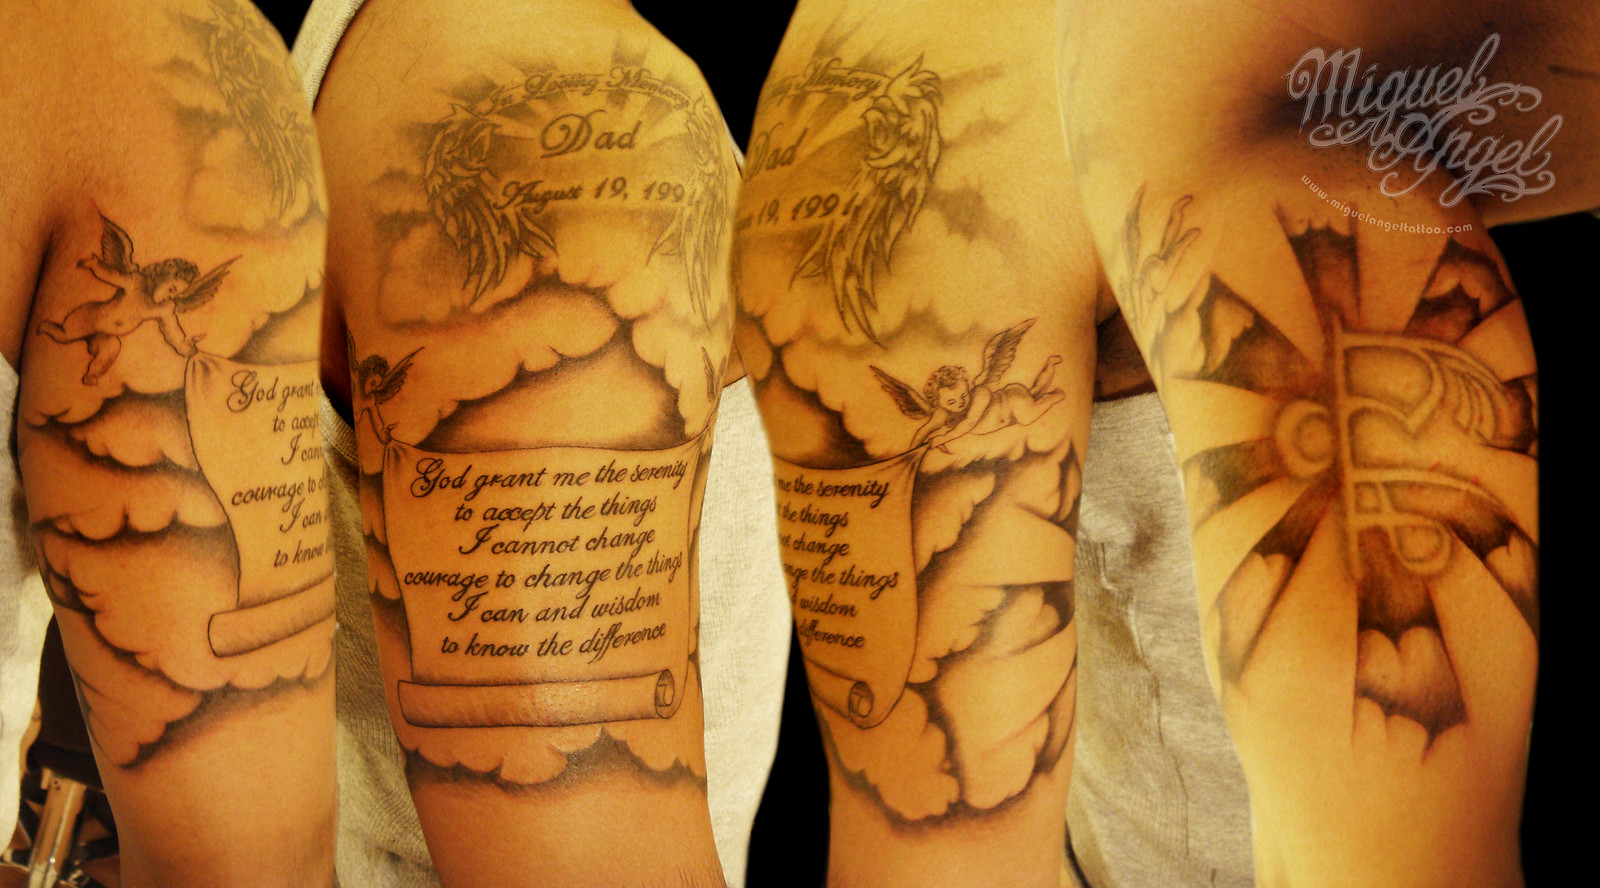 Religious design tattoo, with clouds and cherubs.